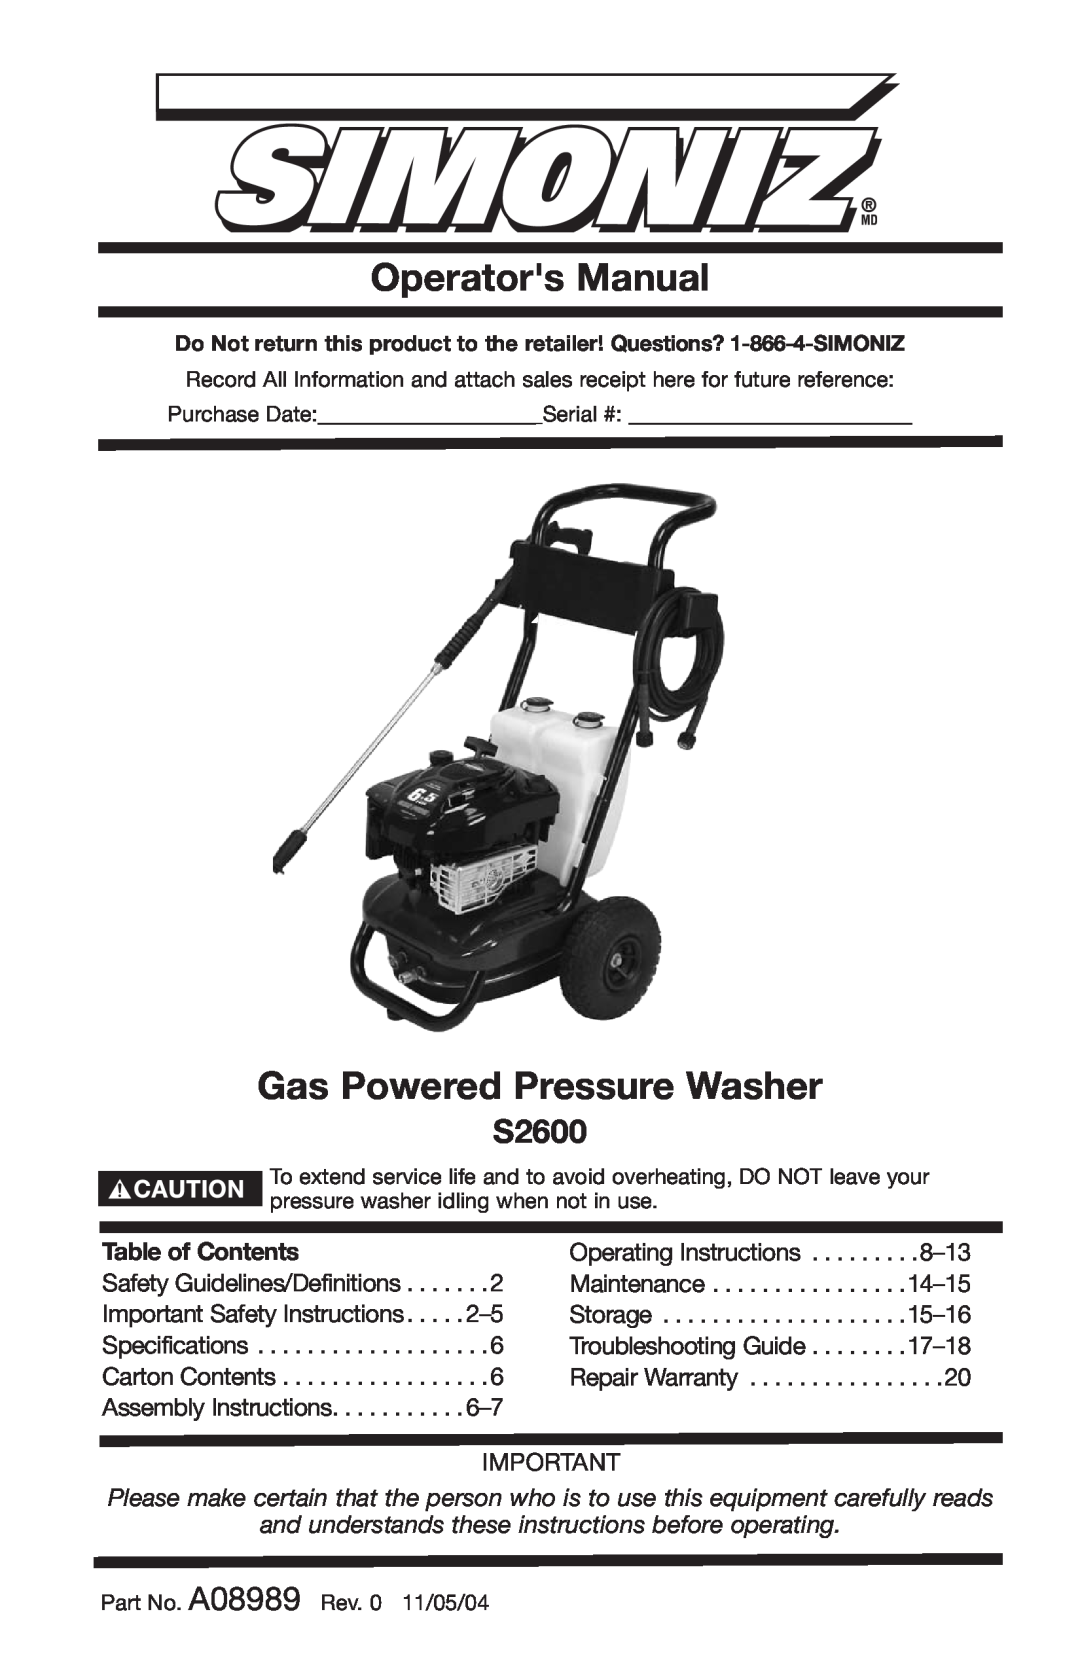 DeVillbiss Air Power Company A08989 important safety instructions Operators Manual, S2600, Gas Powered Pressure Washer 